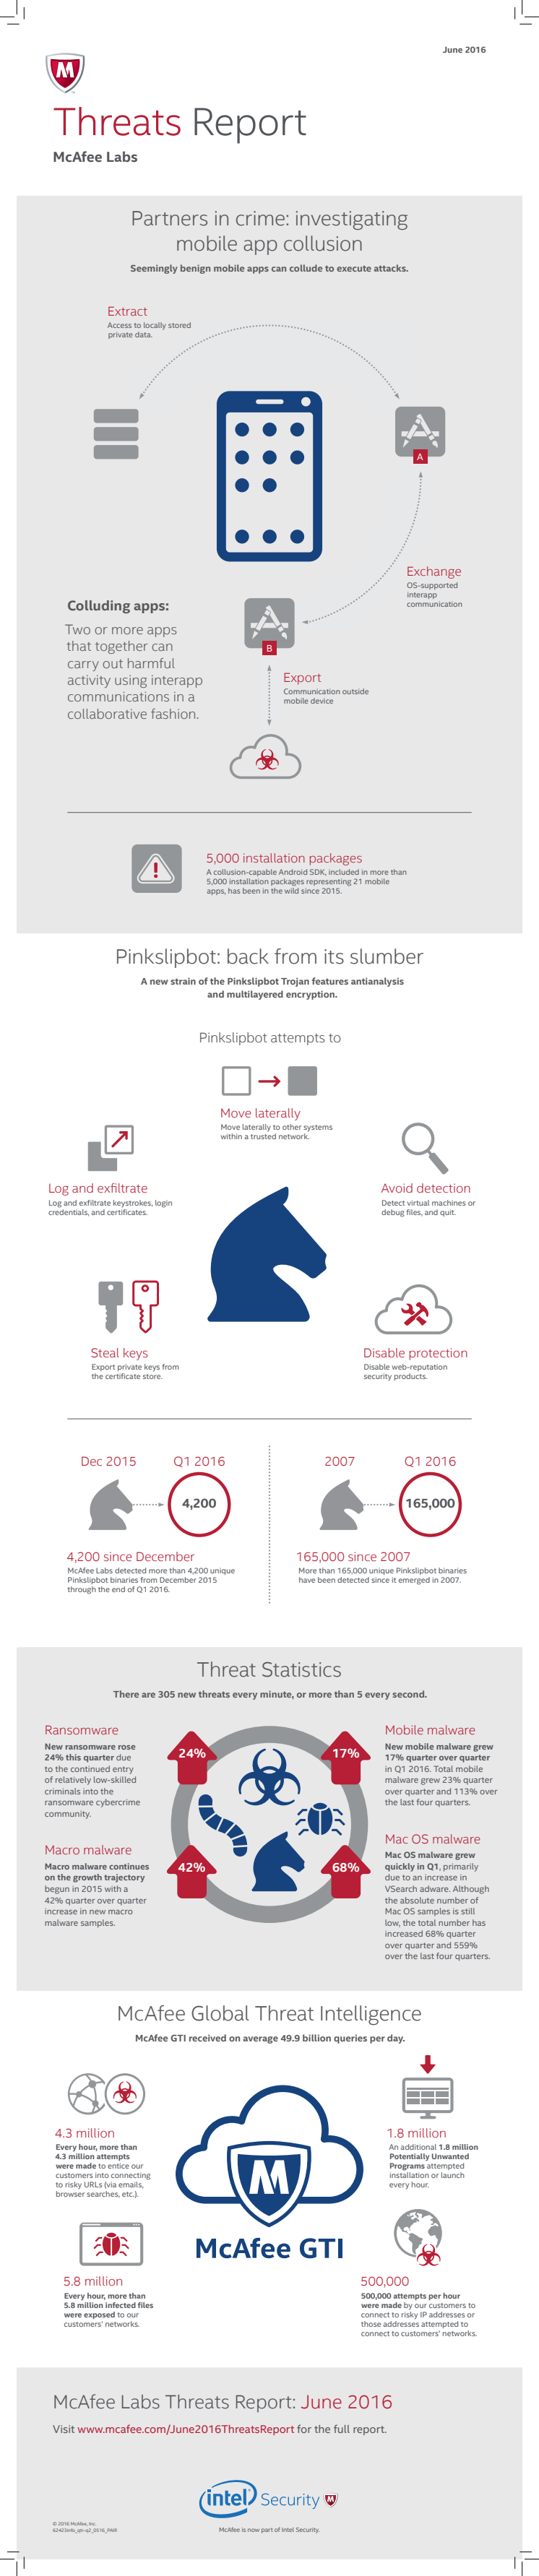 Infographic: McAfee Labs Threats Report June 2016